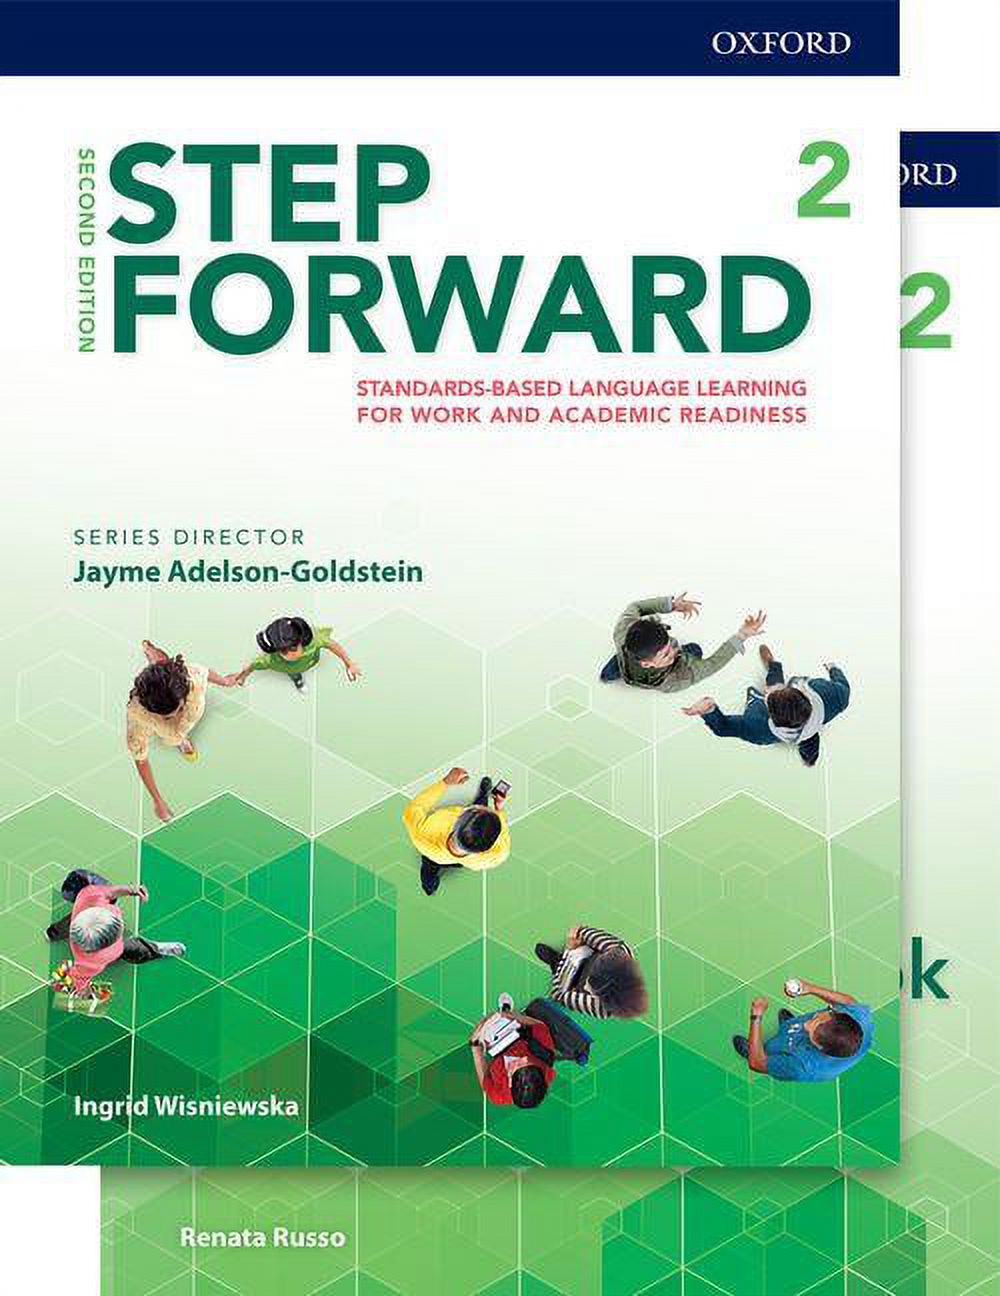 Language　Learning　2e　Work　Readiness　Book　Academic　Pack:　Step　Level　and　and　for　Forward　Standards-Based　Workbook　Student　(Other)